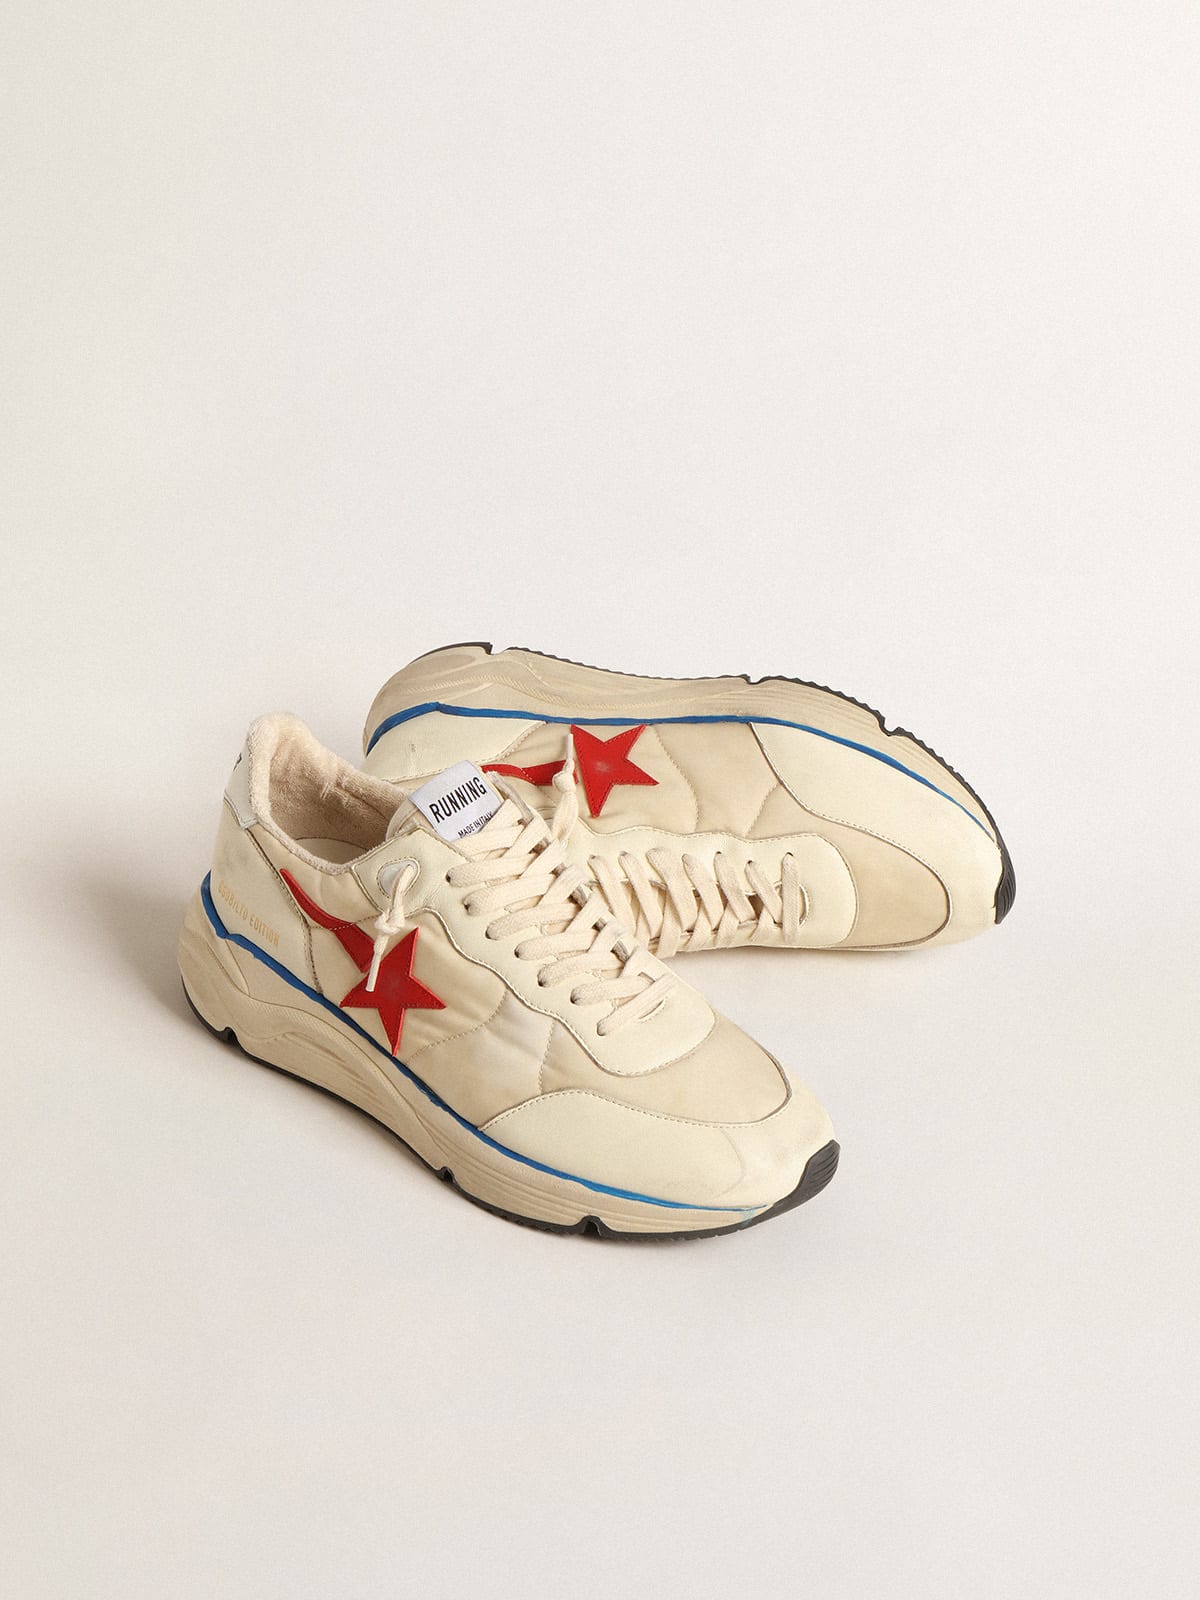 Men's Running Sole LTD in beige nylon with red leather star